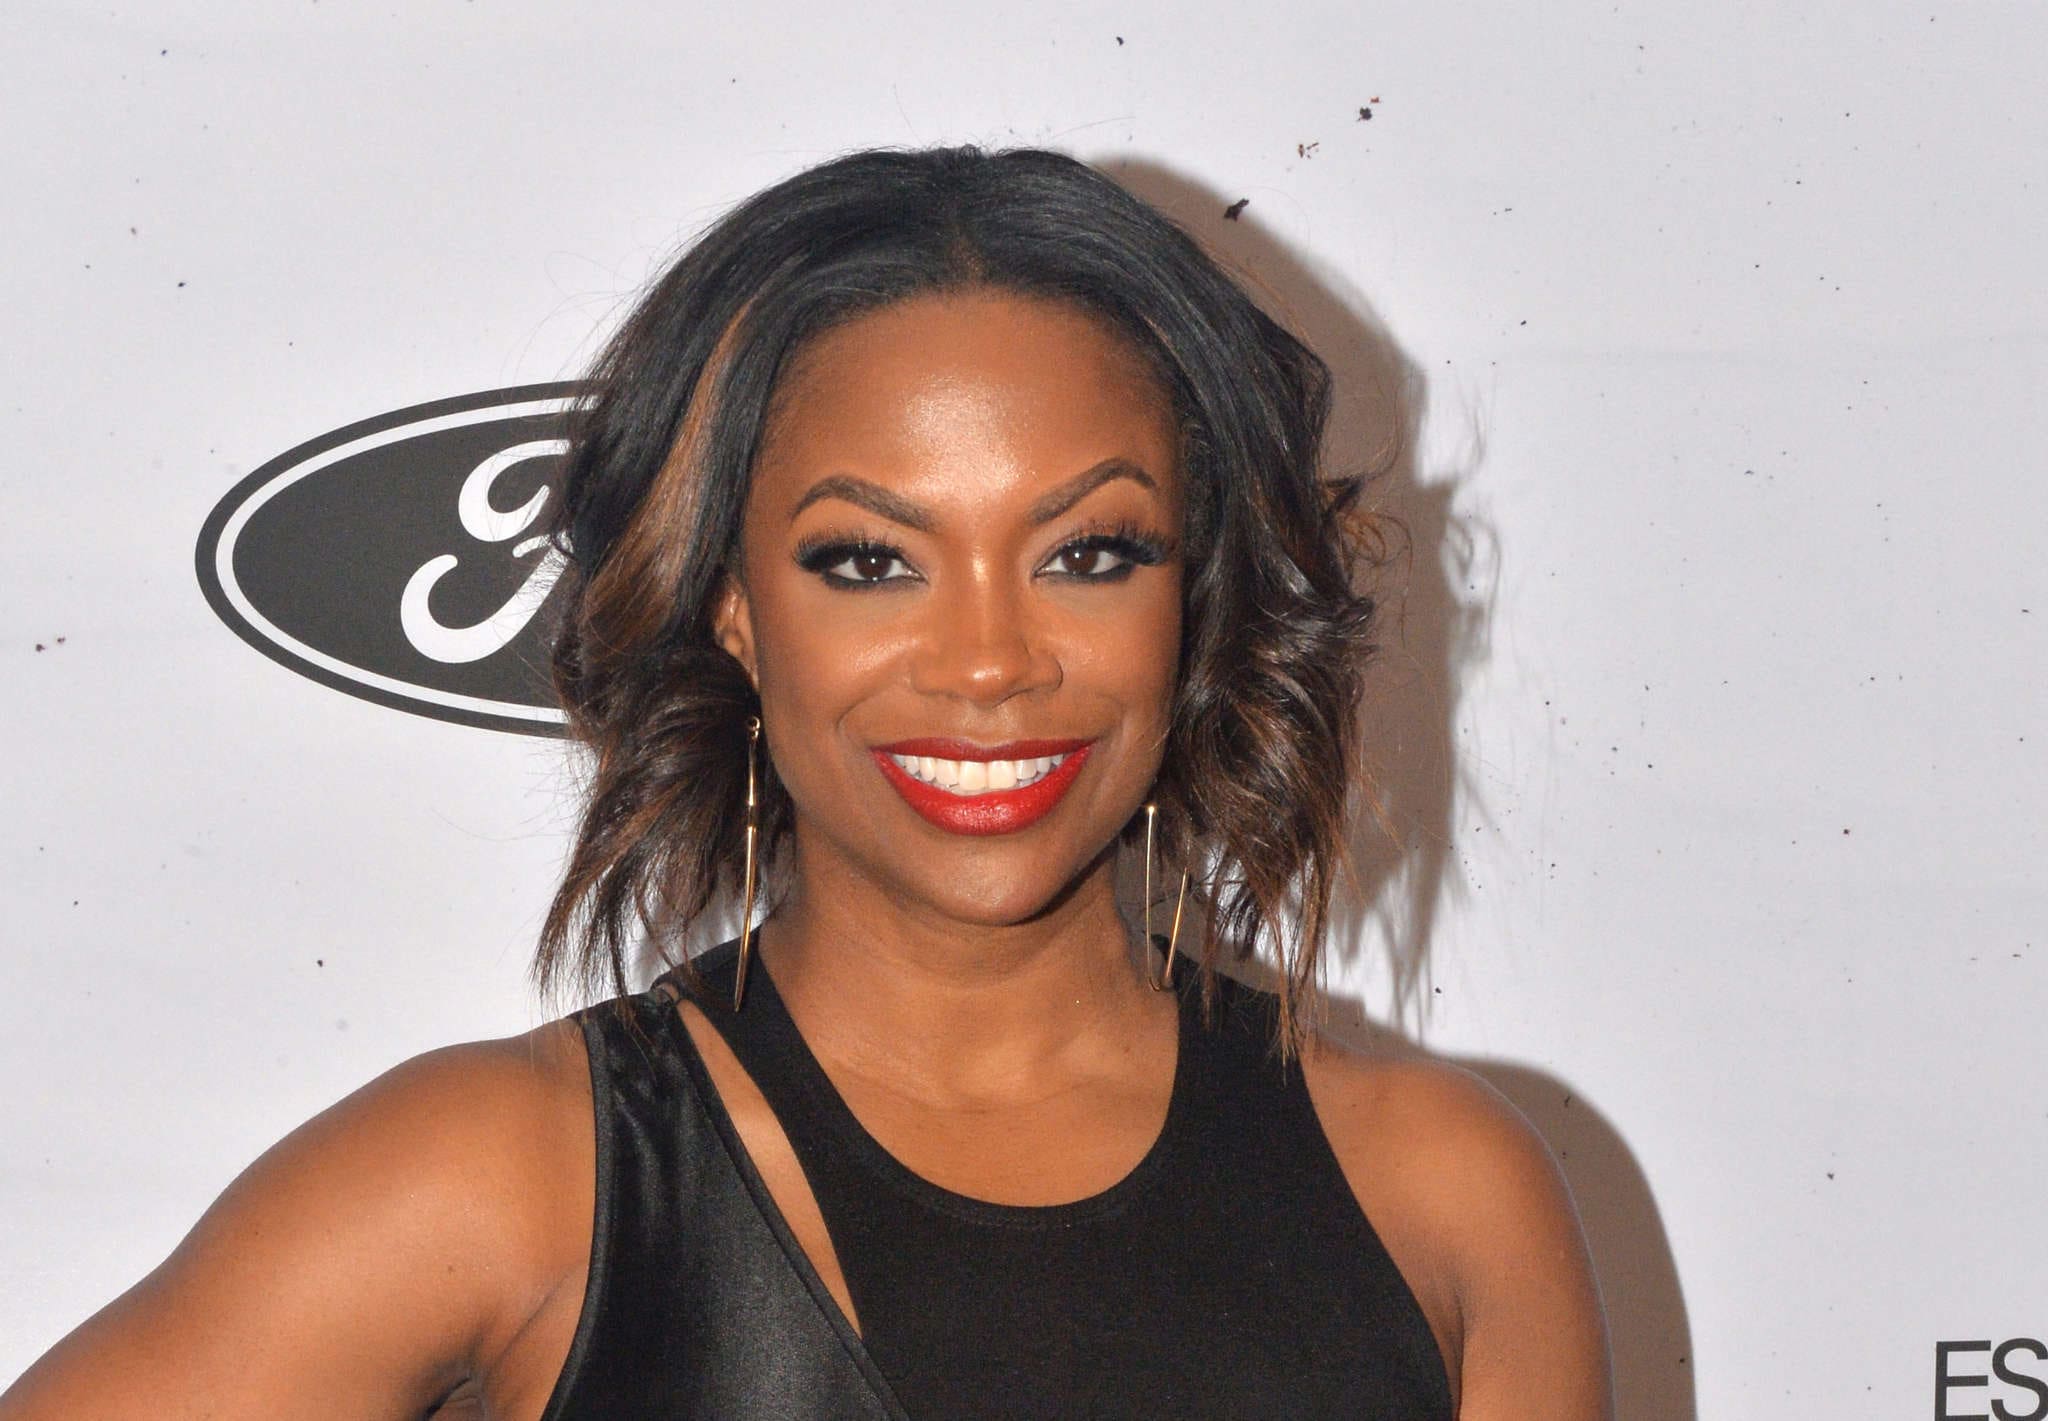 Kandi Burruss Shows Off A New Looks With Braids - Eva Marcille And Riley Burruss Are Loving It